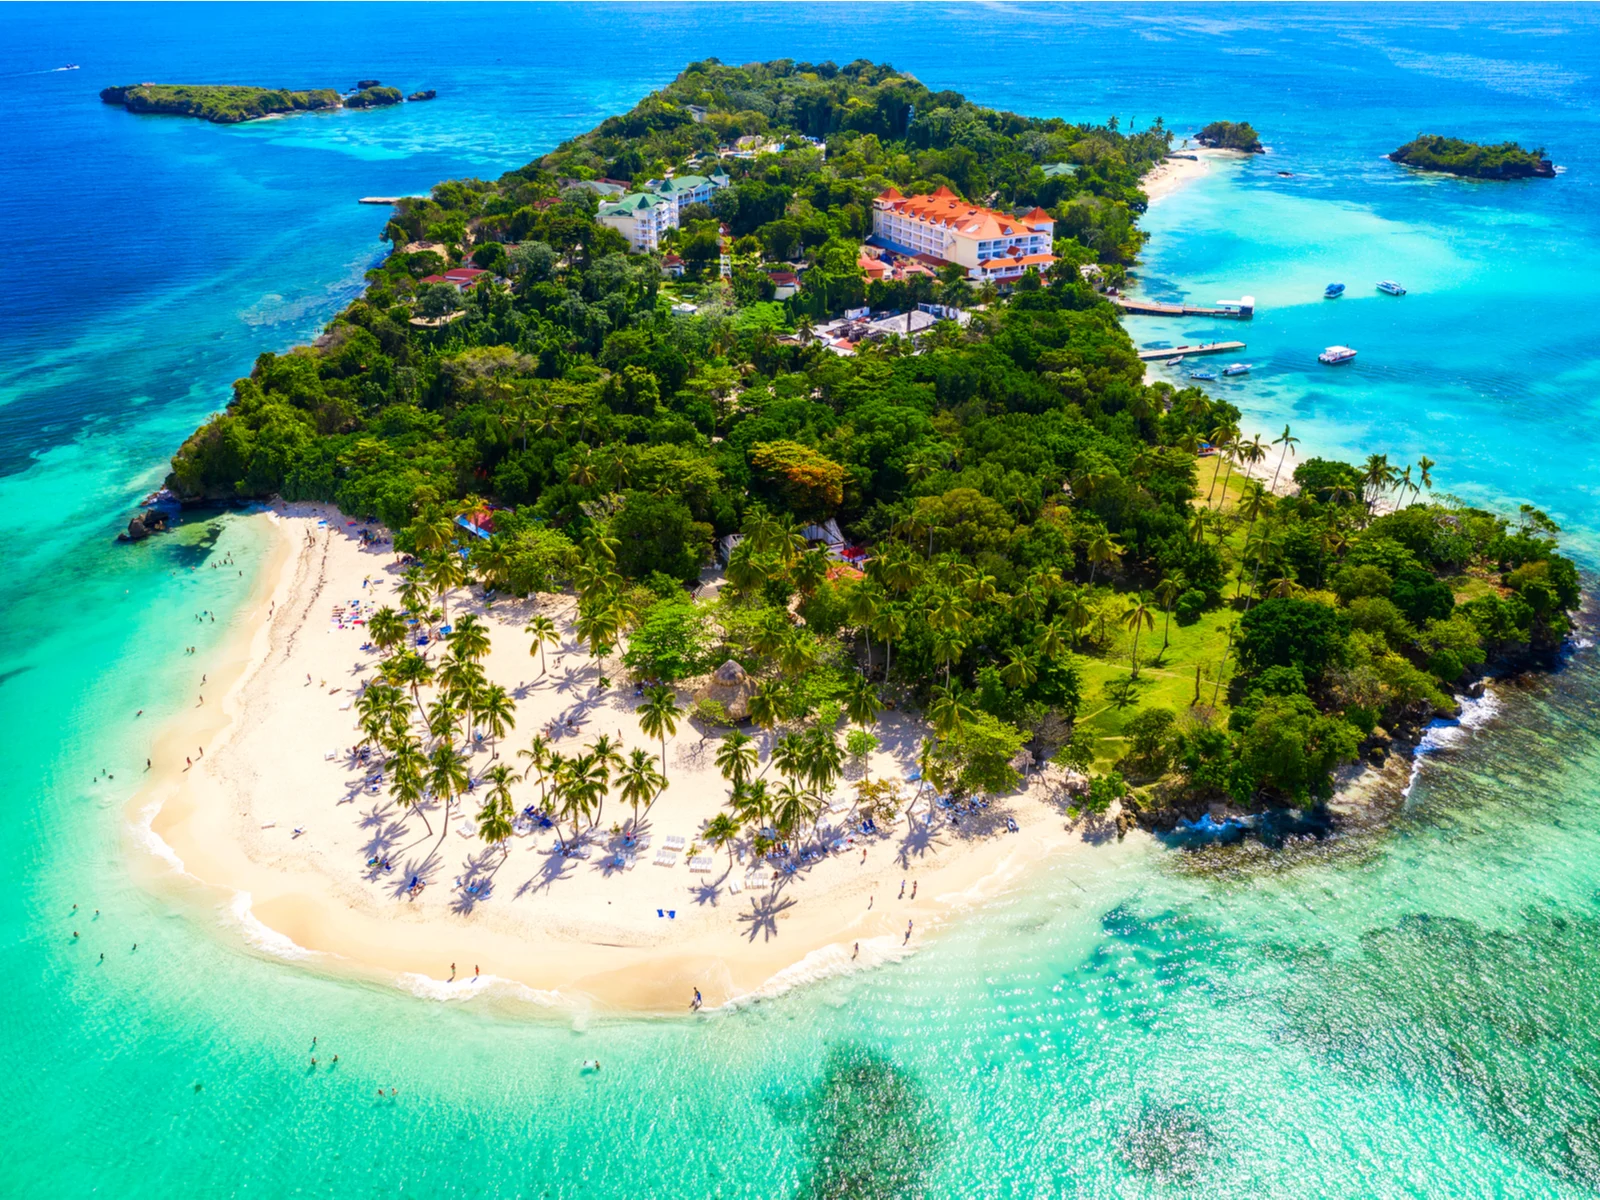 Aerial view of the small island of Cayo Levantado in Samaná, one of the best beaches in the Dominican Republic, with some tourist enjoying the white sand beach and a couple of vacation hotels at the center of its small forest